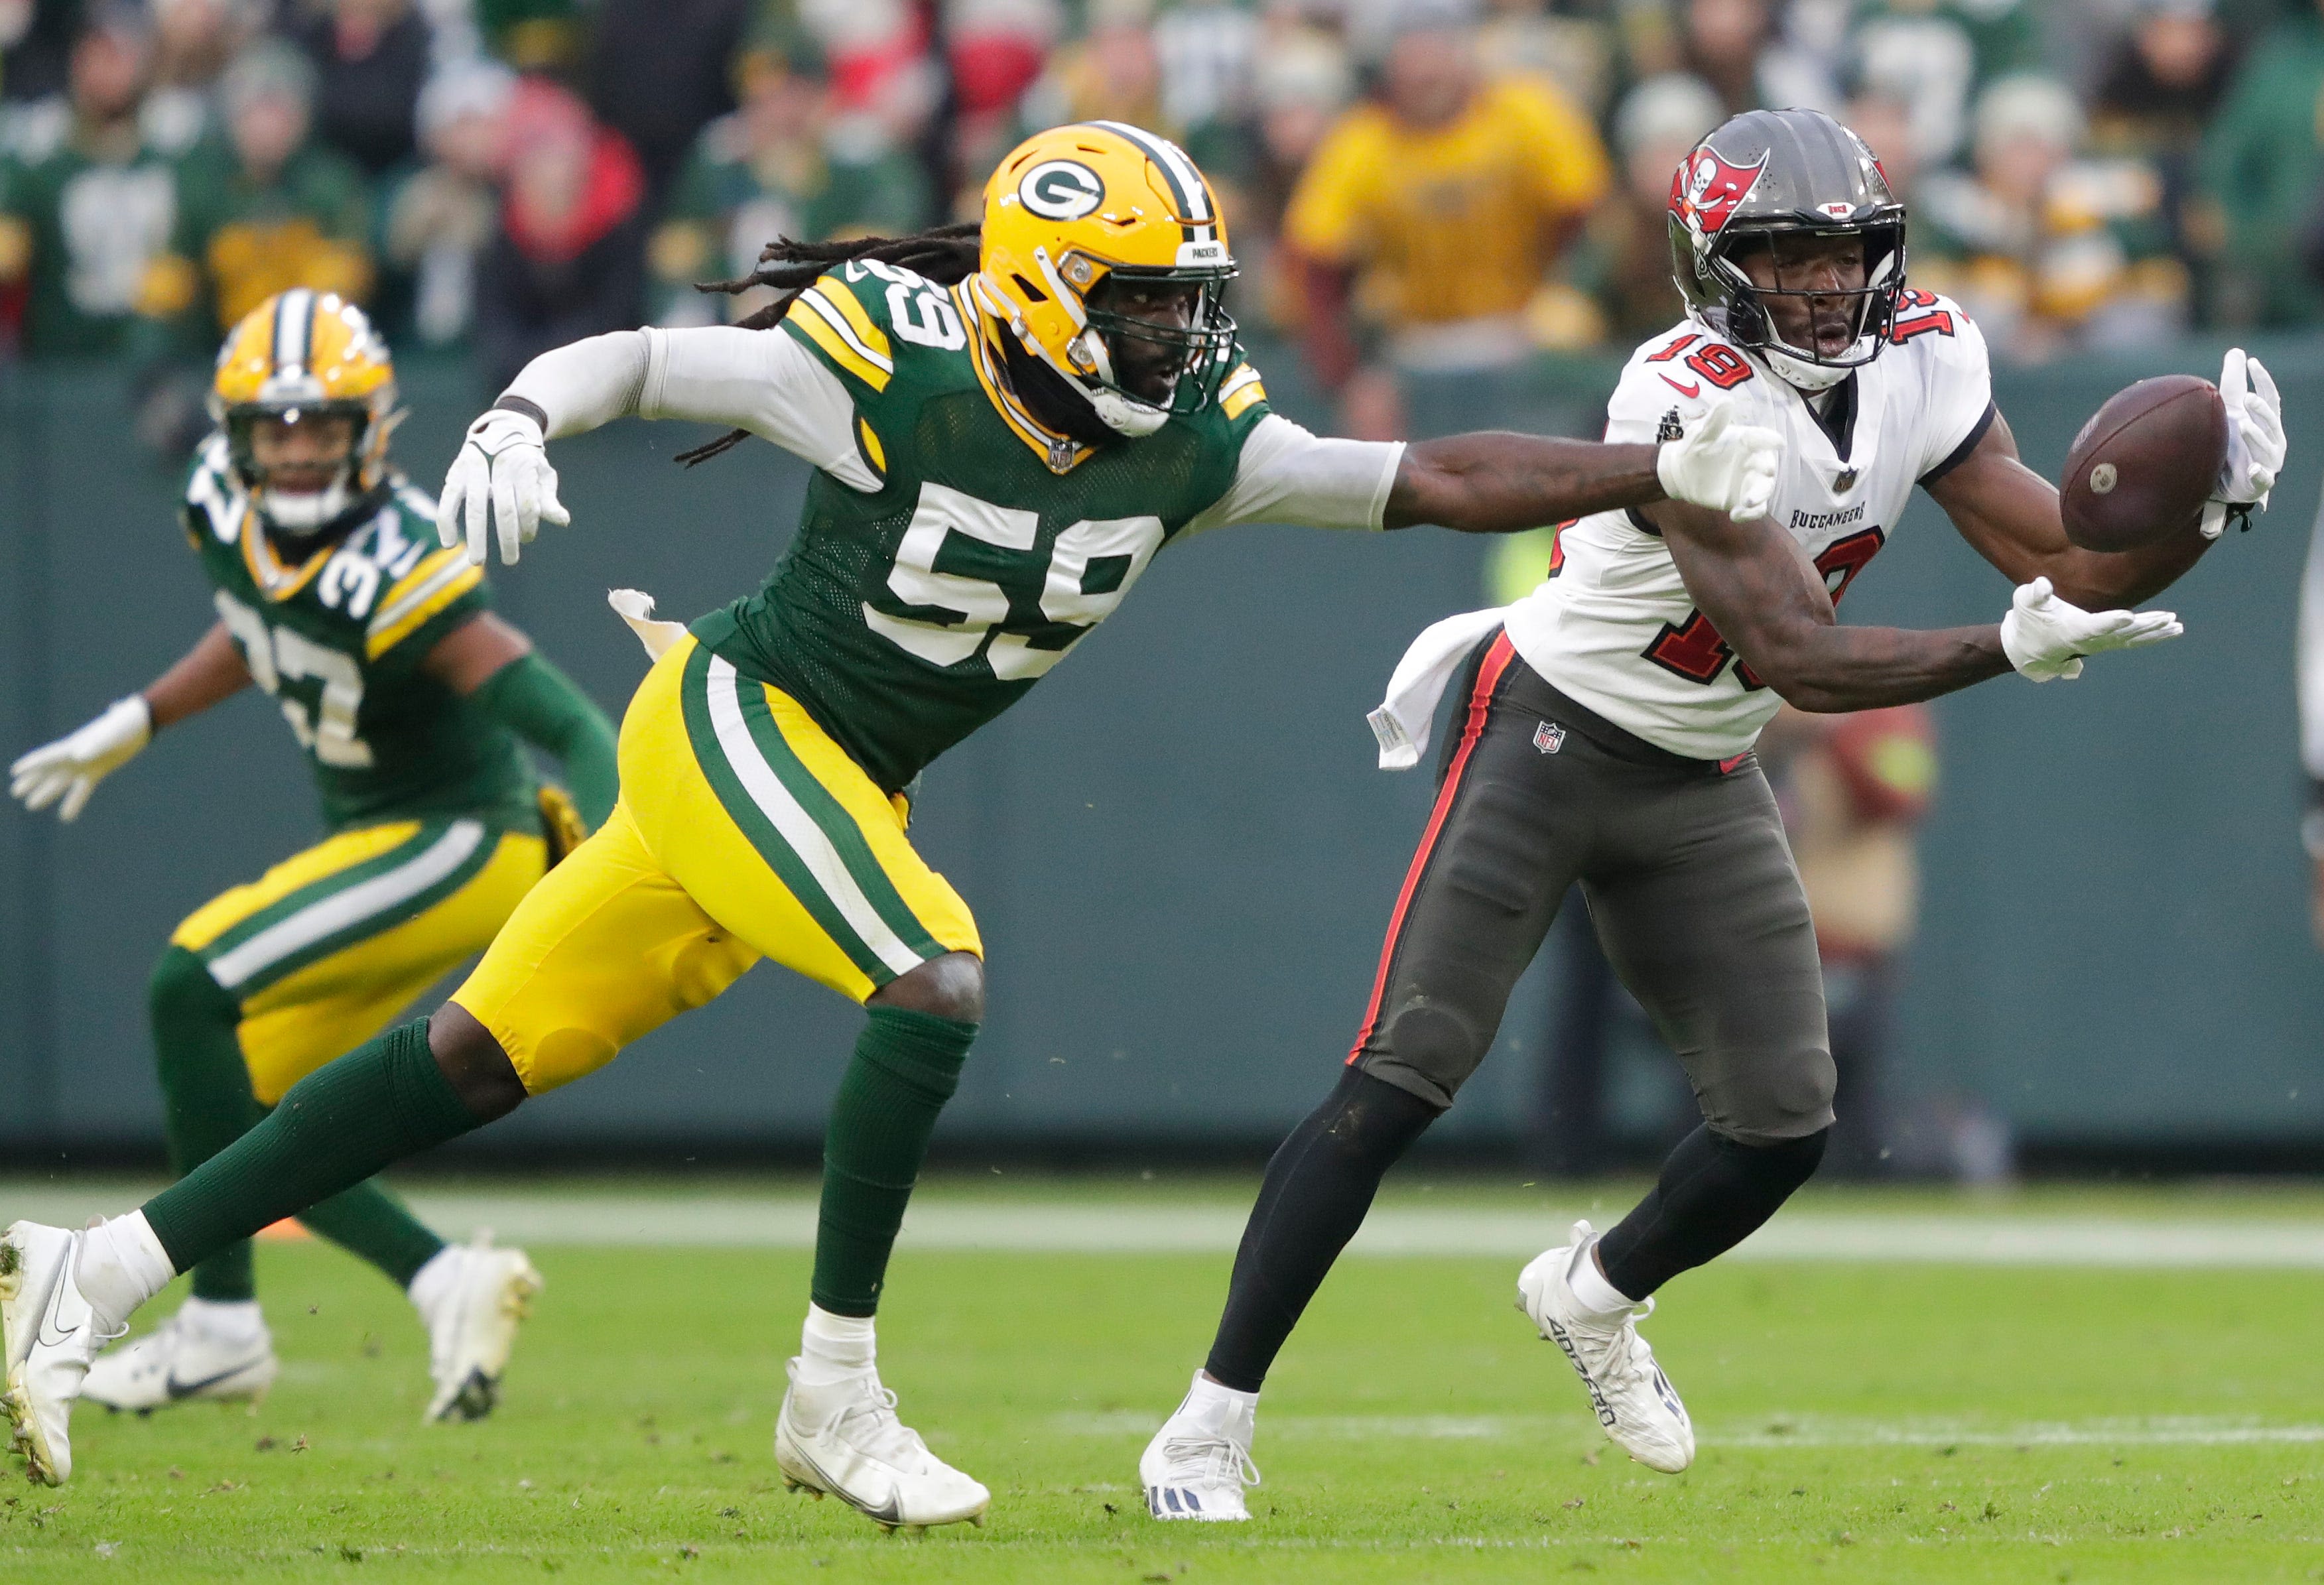 Former Packers linebacker De'Vondre Campbell says being in Green Bay was making him 'lose my love for the game'